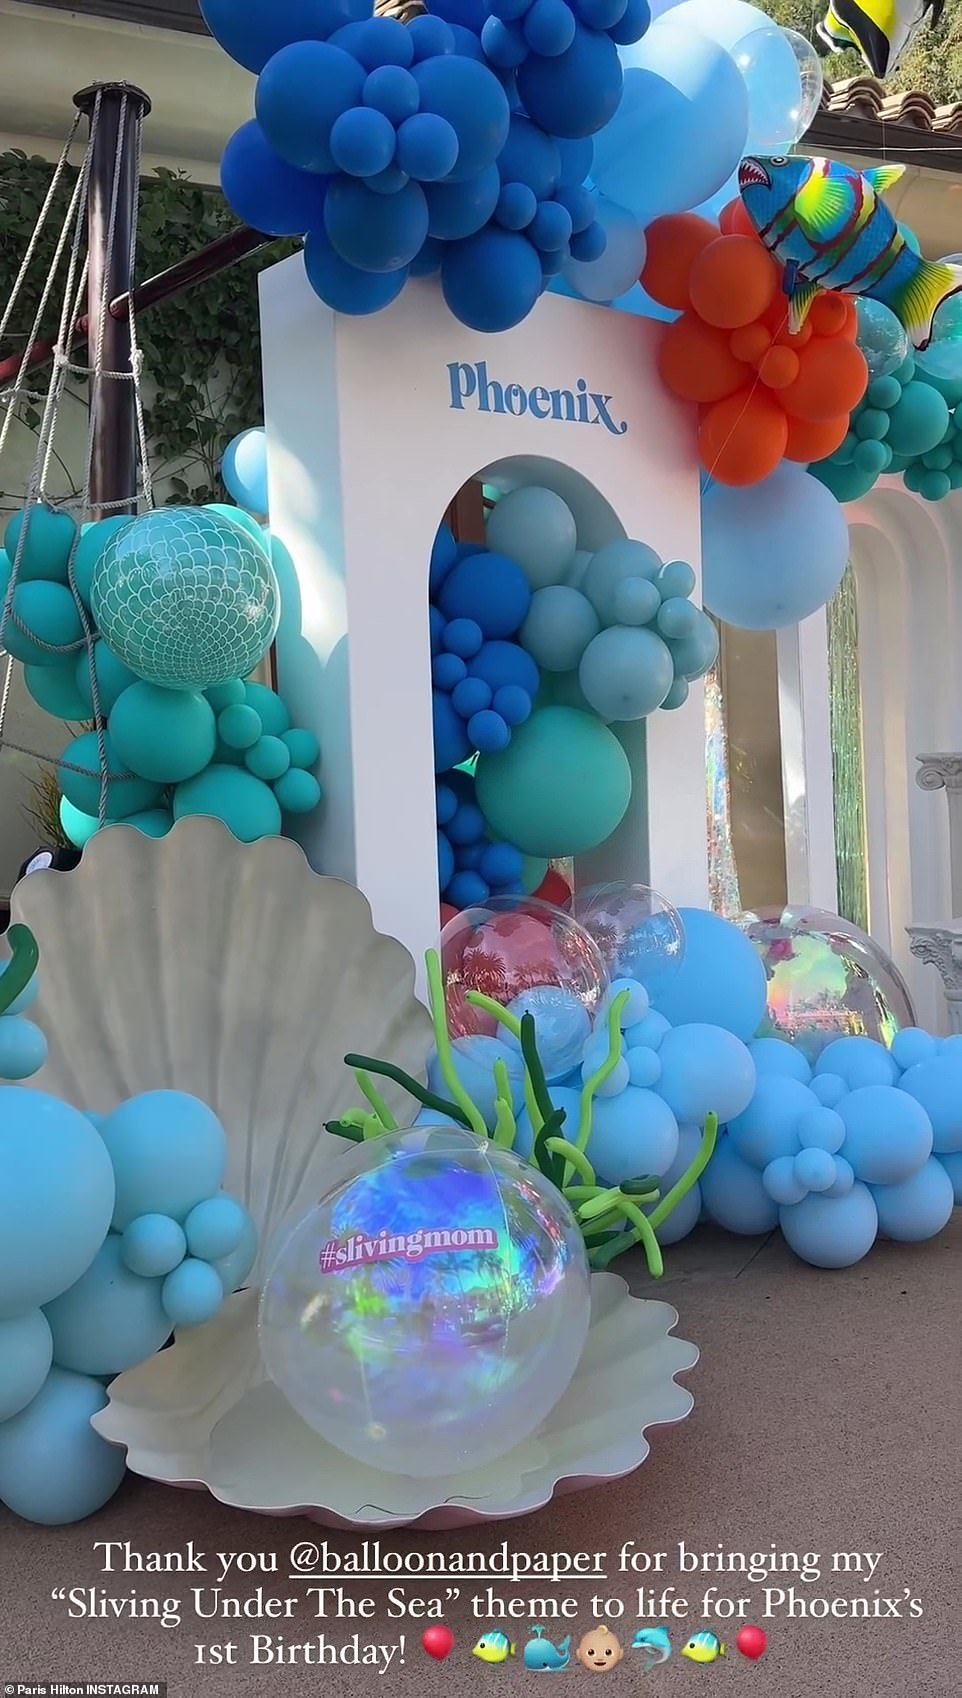 Paris gave a special shoutout to Balloon and Paper for transforming her backyard for the party